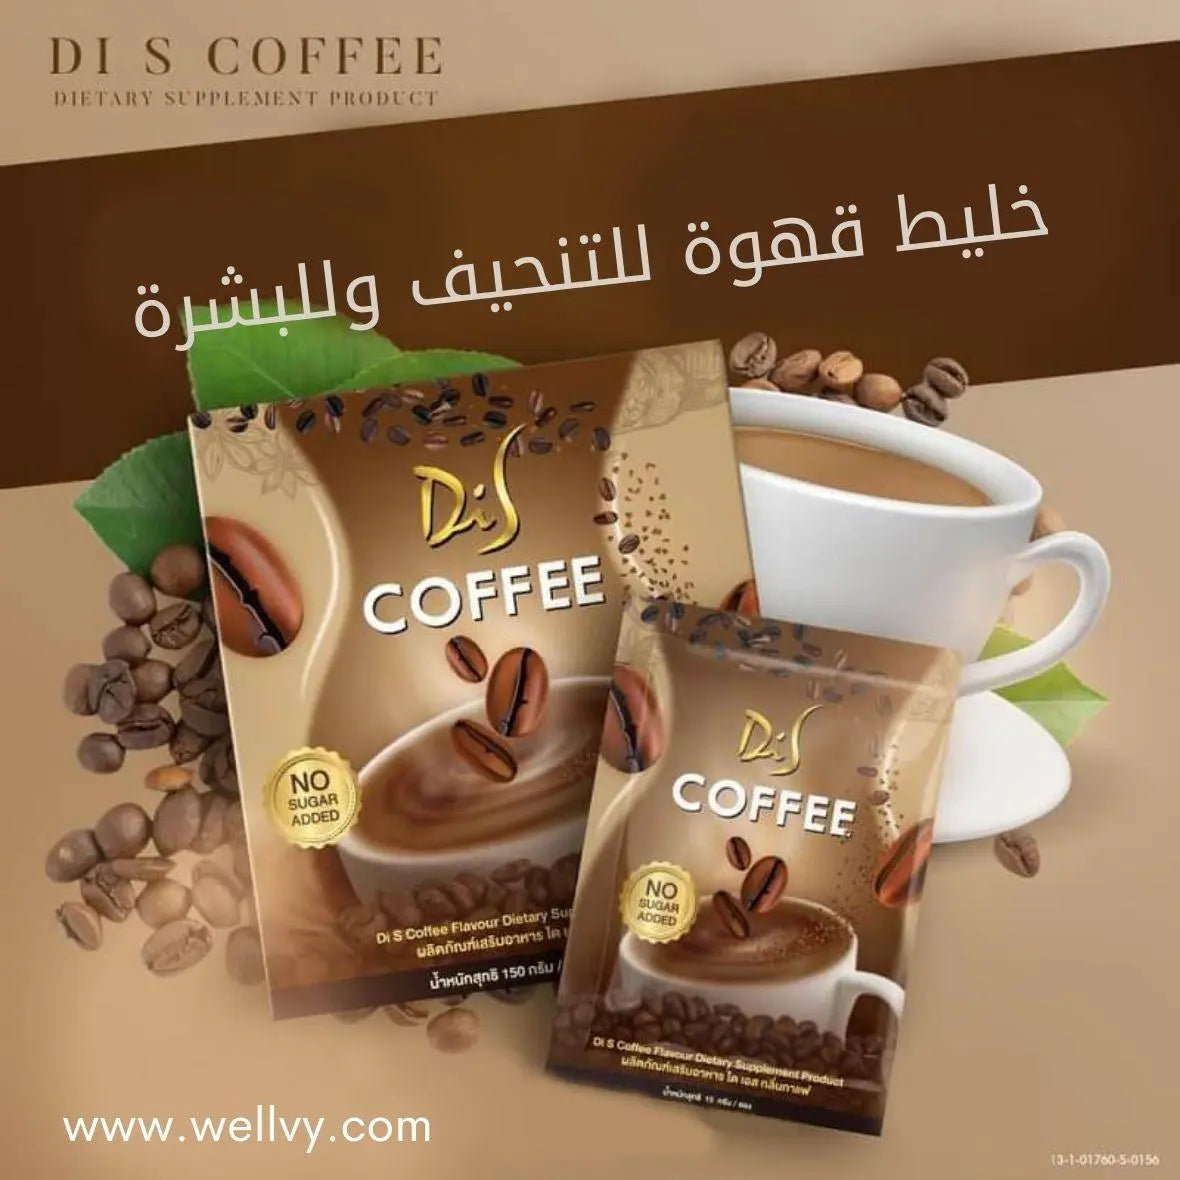 Di S COFFEE FOR WEIGHT CONTROL - wellvy wellness store